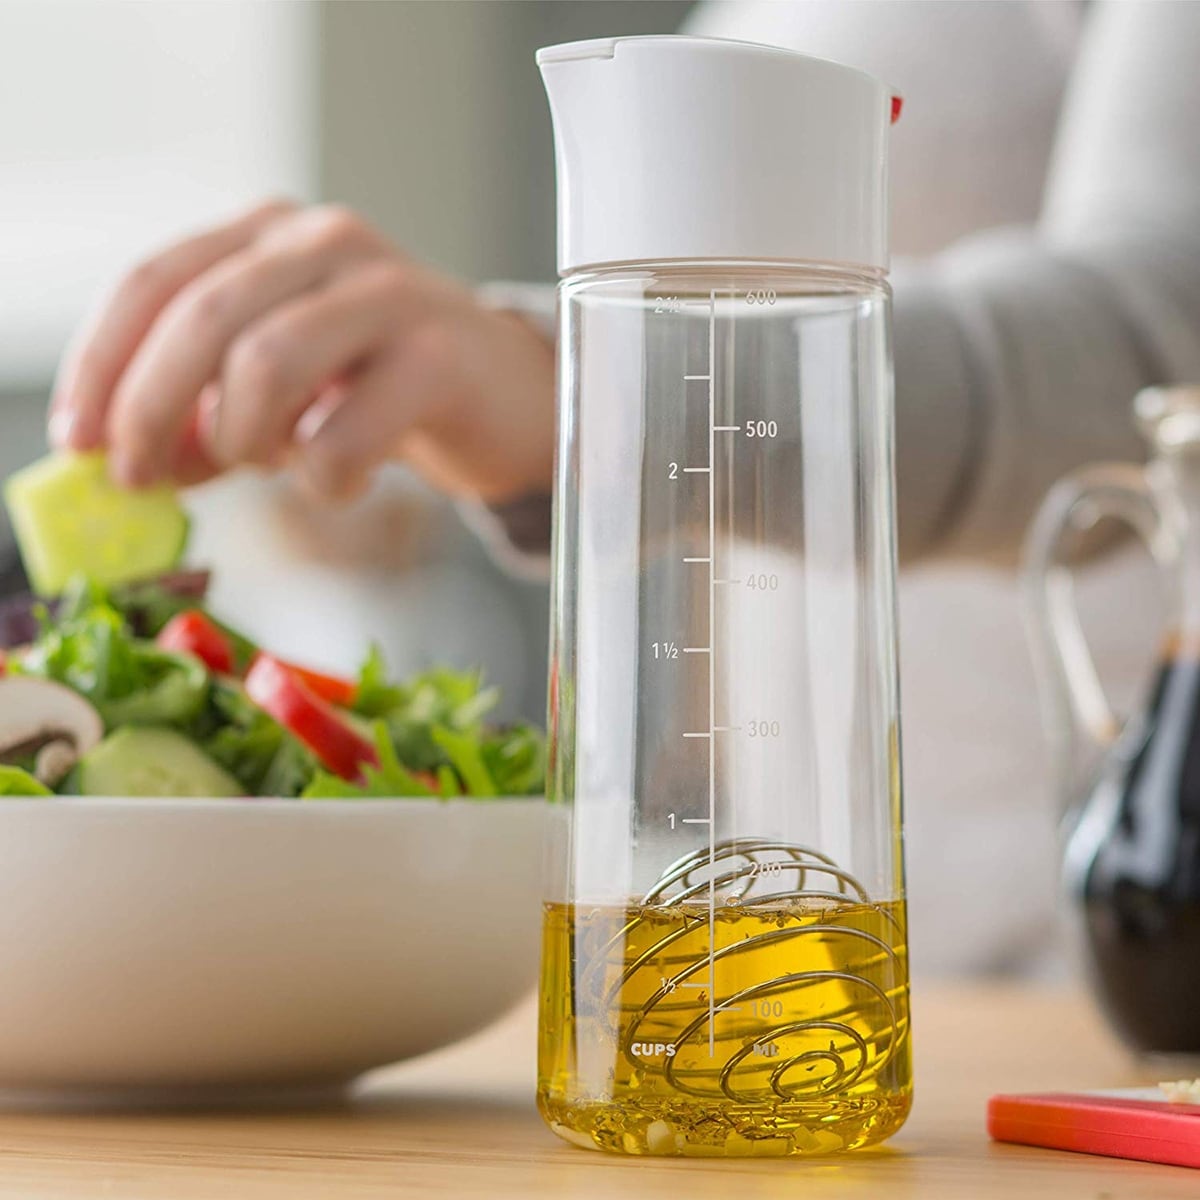 by Zalik Salad Dressing Shaker Mixer Bottle Cup Essential Kitchen Tool for Dressings Sauces Marinades & Dips 200% Better Mixing With Emulstir Blender 400ml Heavy Duty Salad Maker with Pourer 